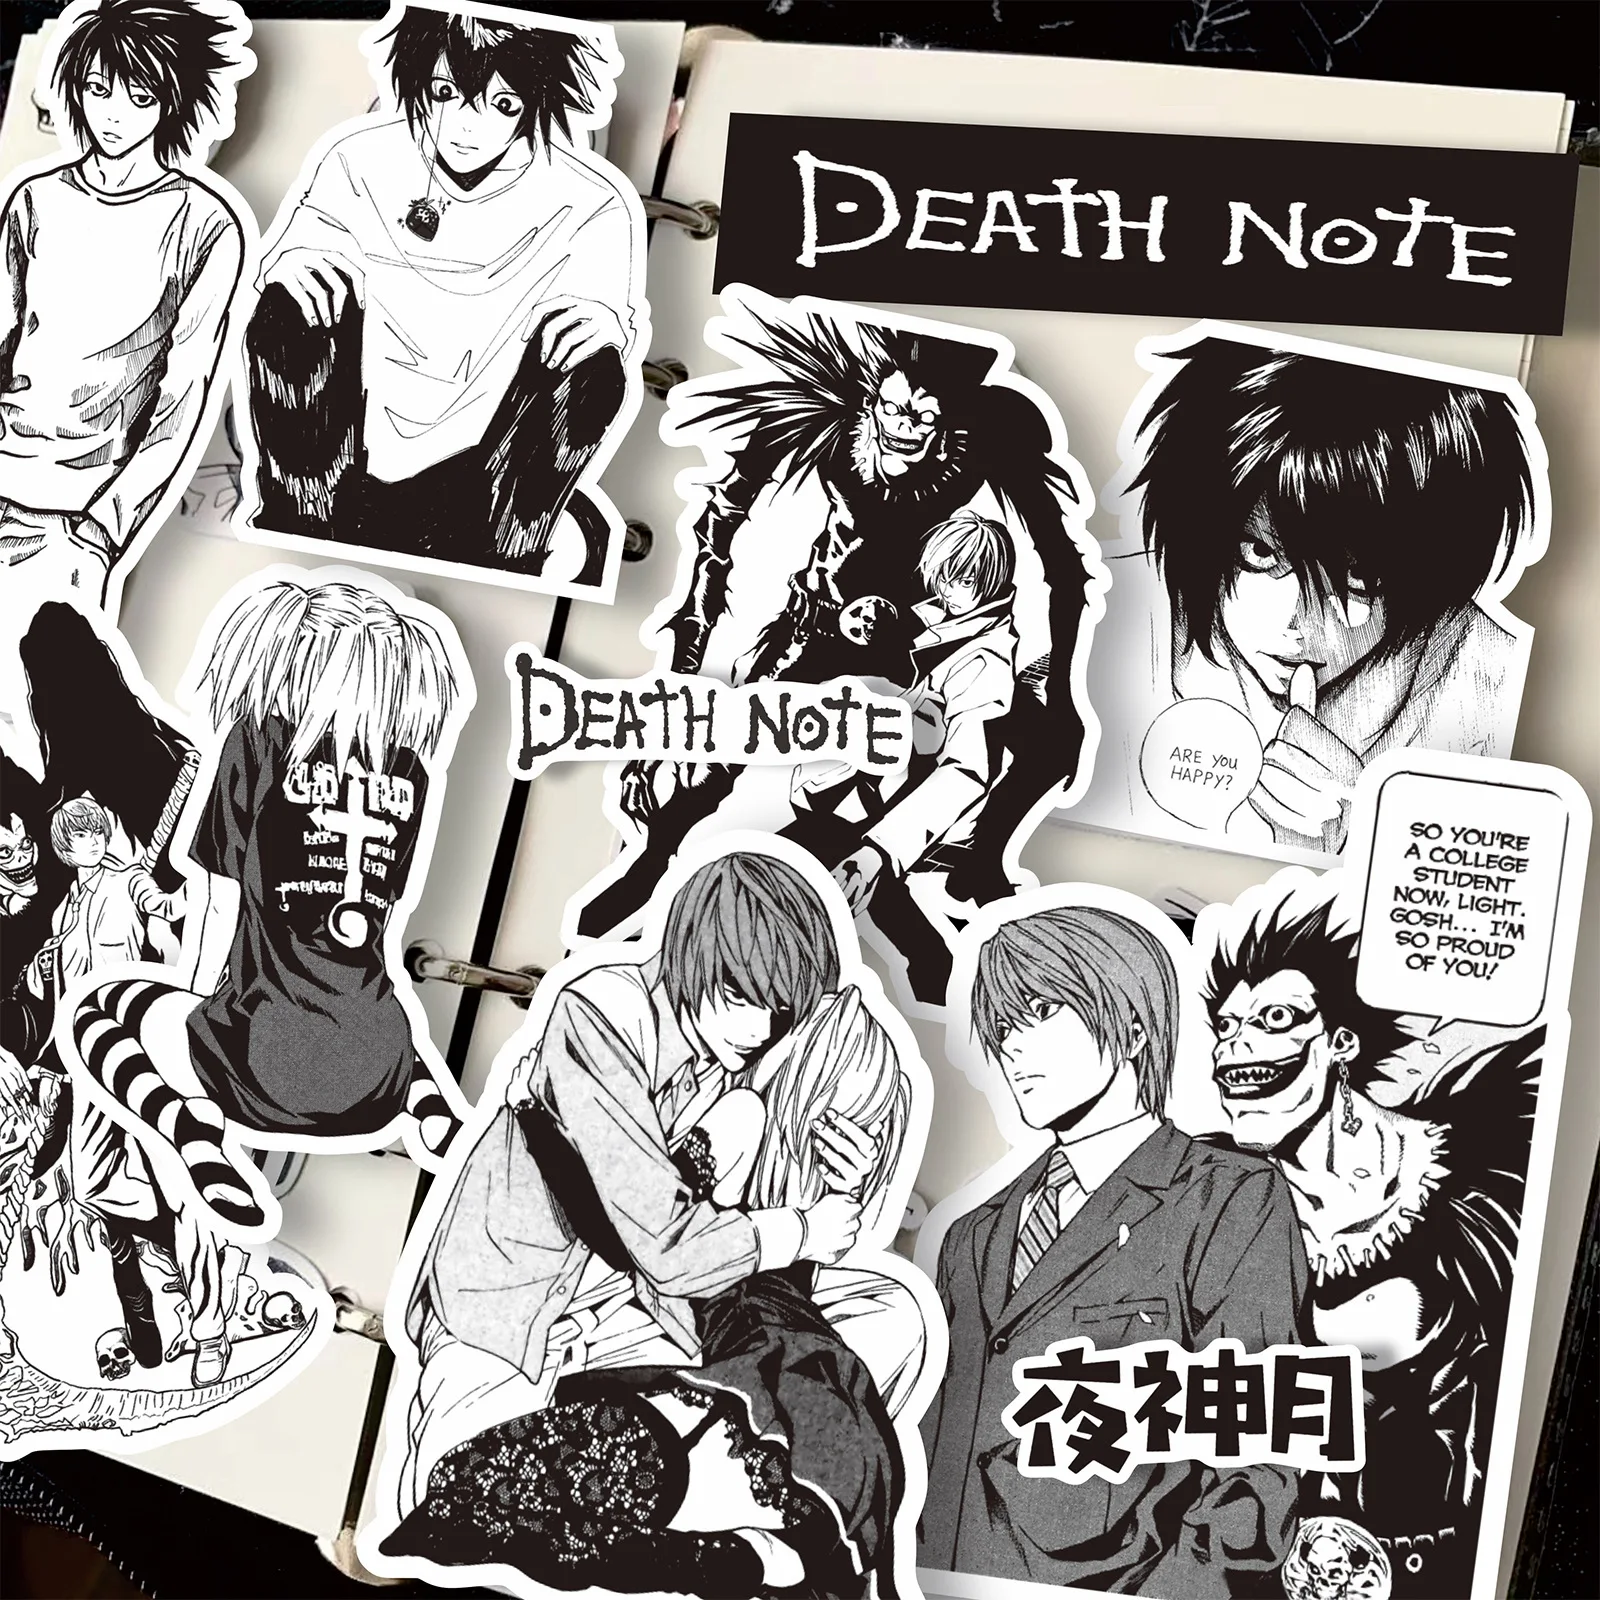 65pcs Anime DEATH NOTE Black White Graffiti Stickers Pack Decals Scrapbooking Notebook Luggage Laptop Skateboard Car for Kids